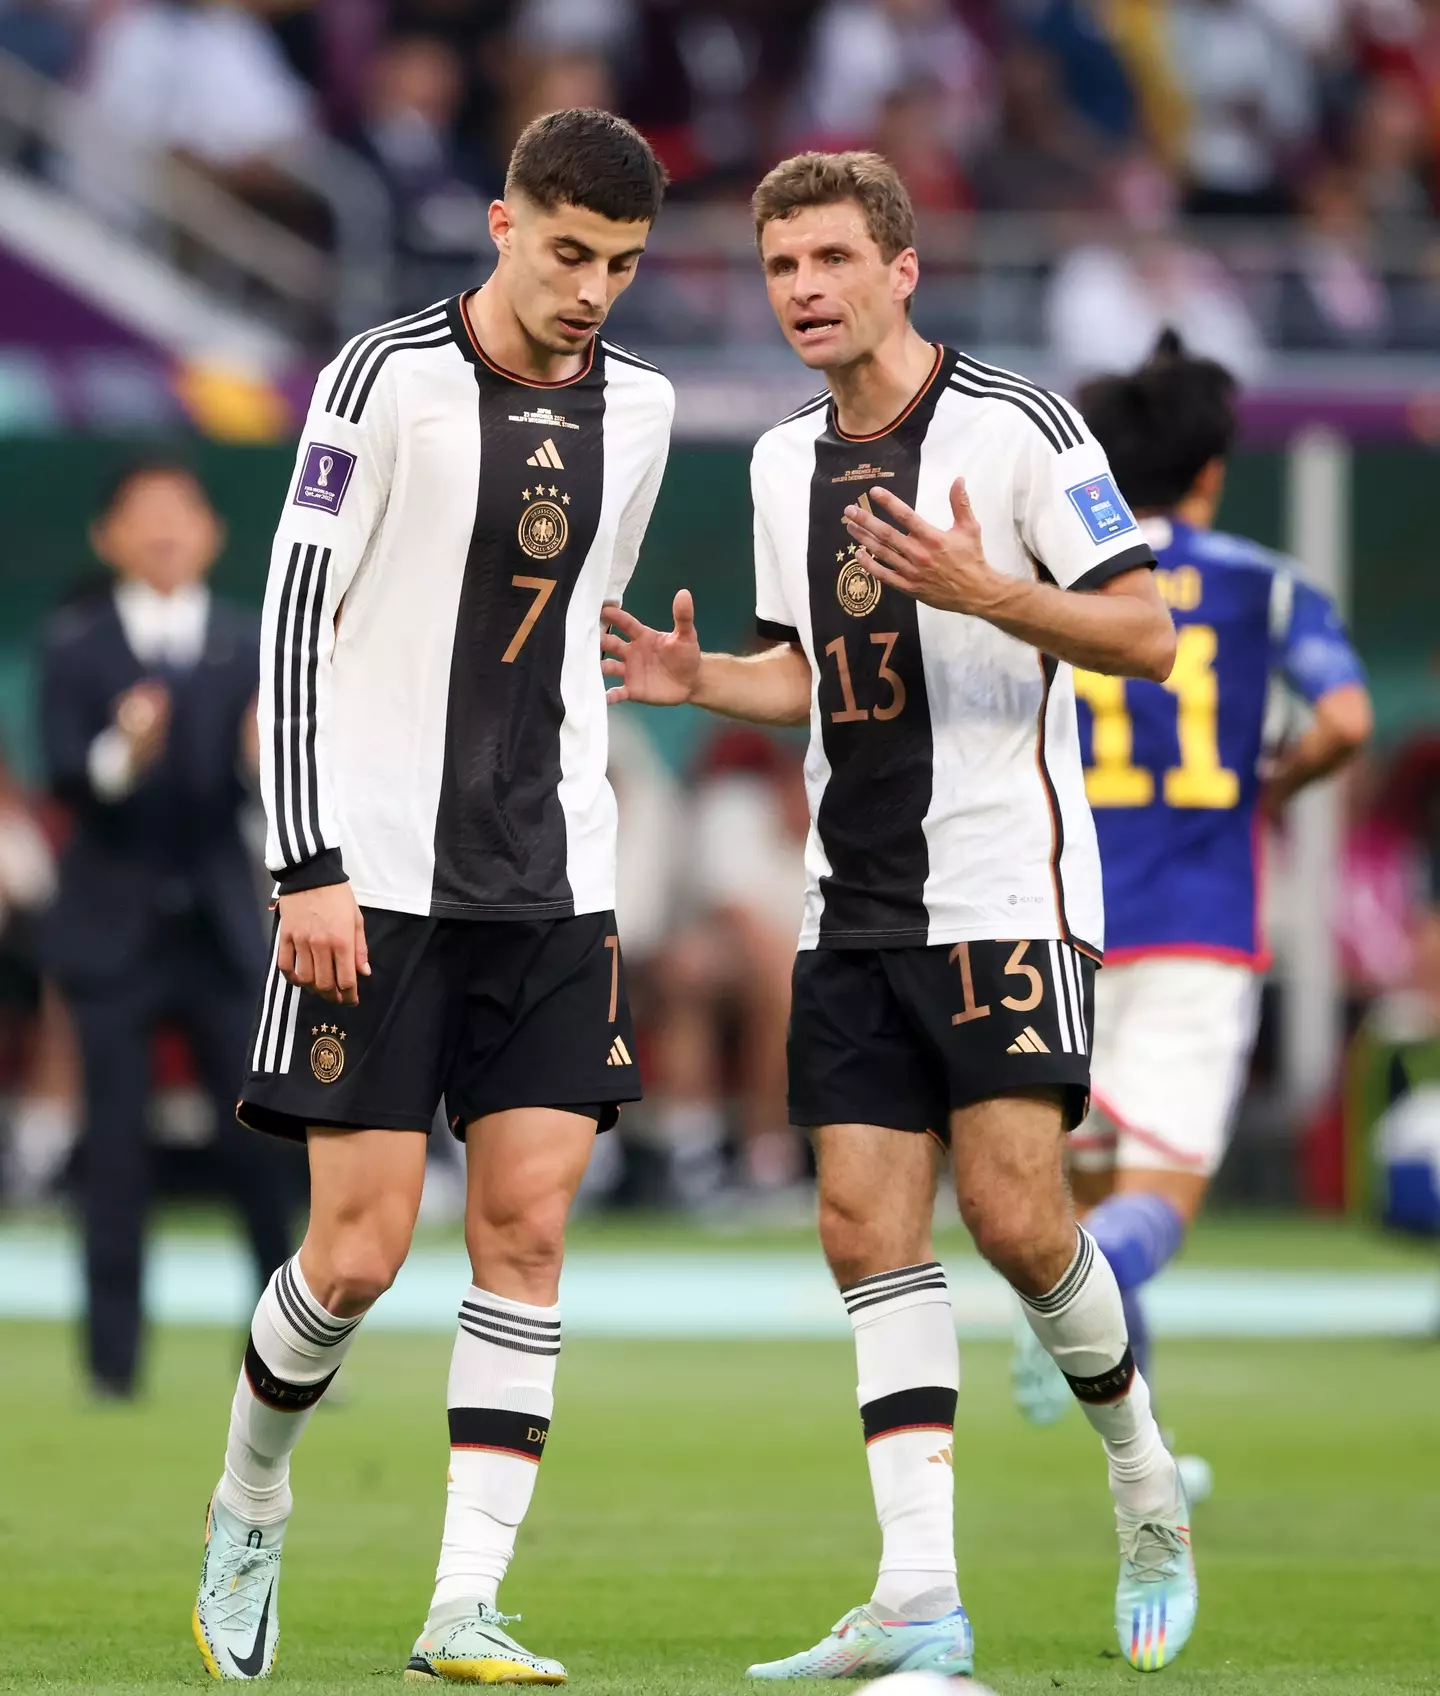 Havertz and Muller play together with Germany (Getty)